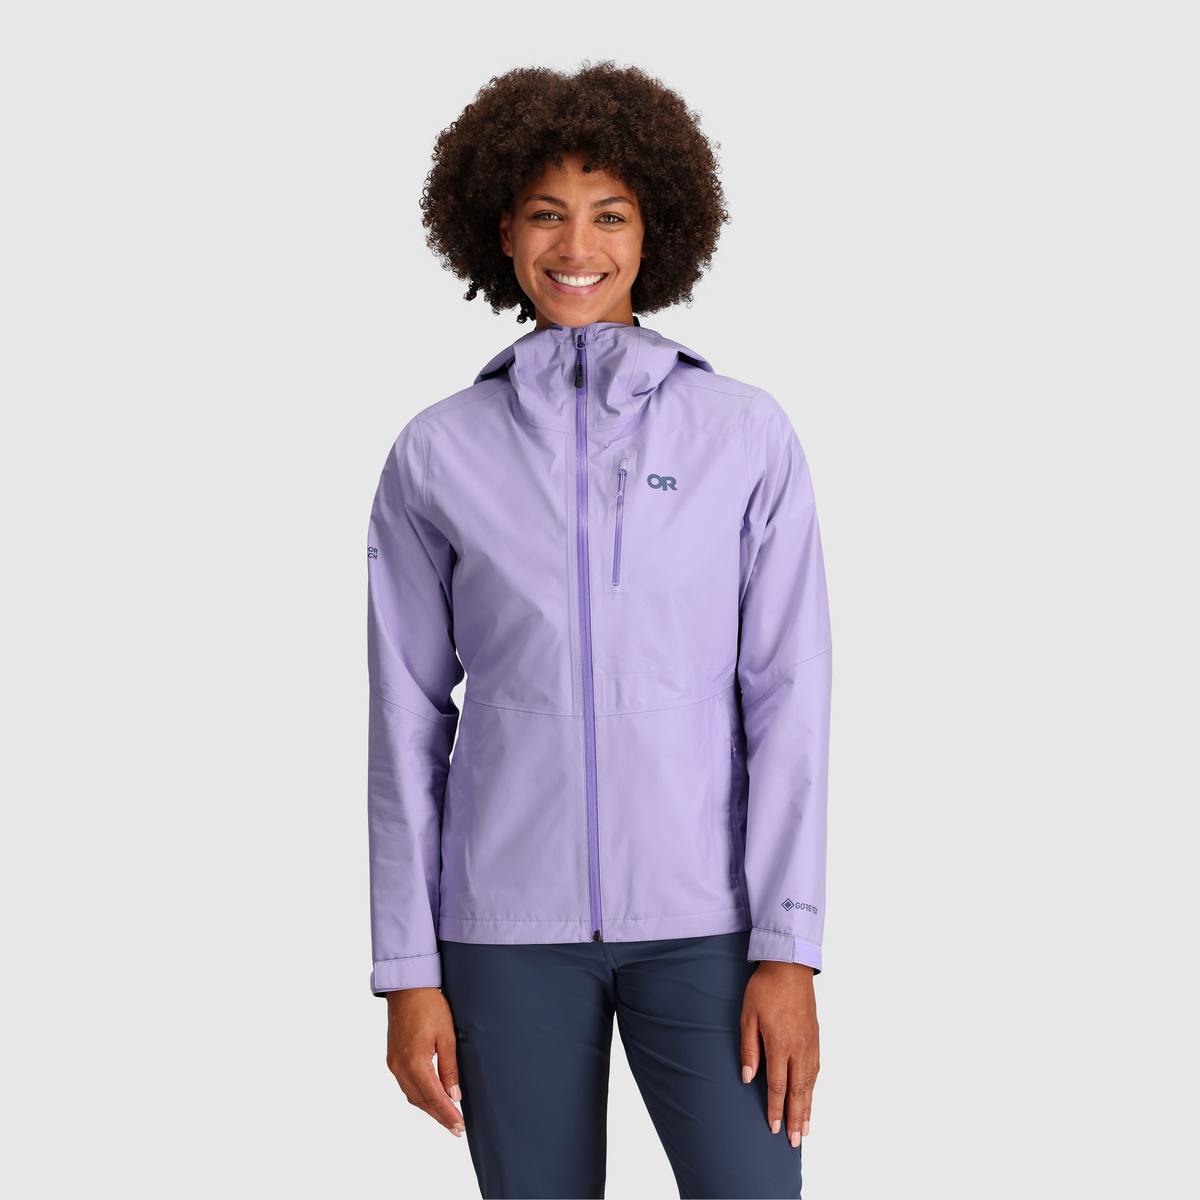 Unlock Wilderness' choice in the Outdoor Research Vs North Face comparison, the Aspire II GORE-TEX® Jacket by Outdoor Research